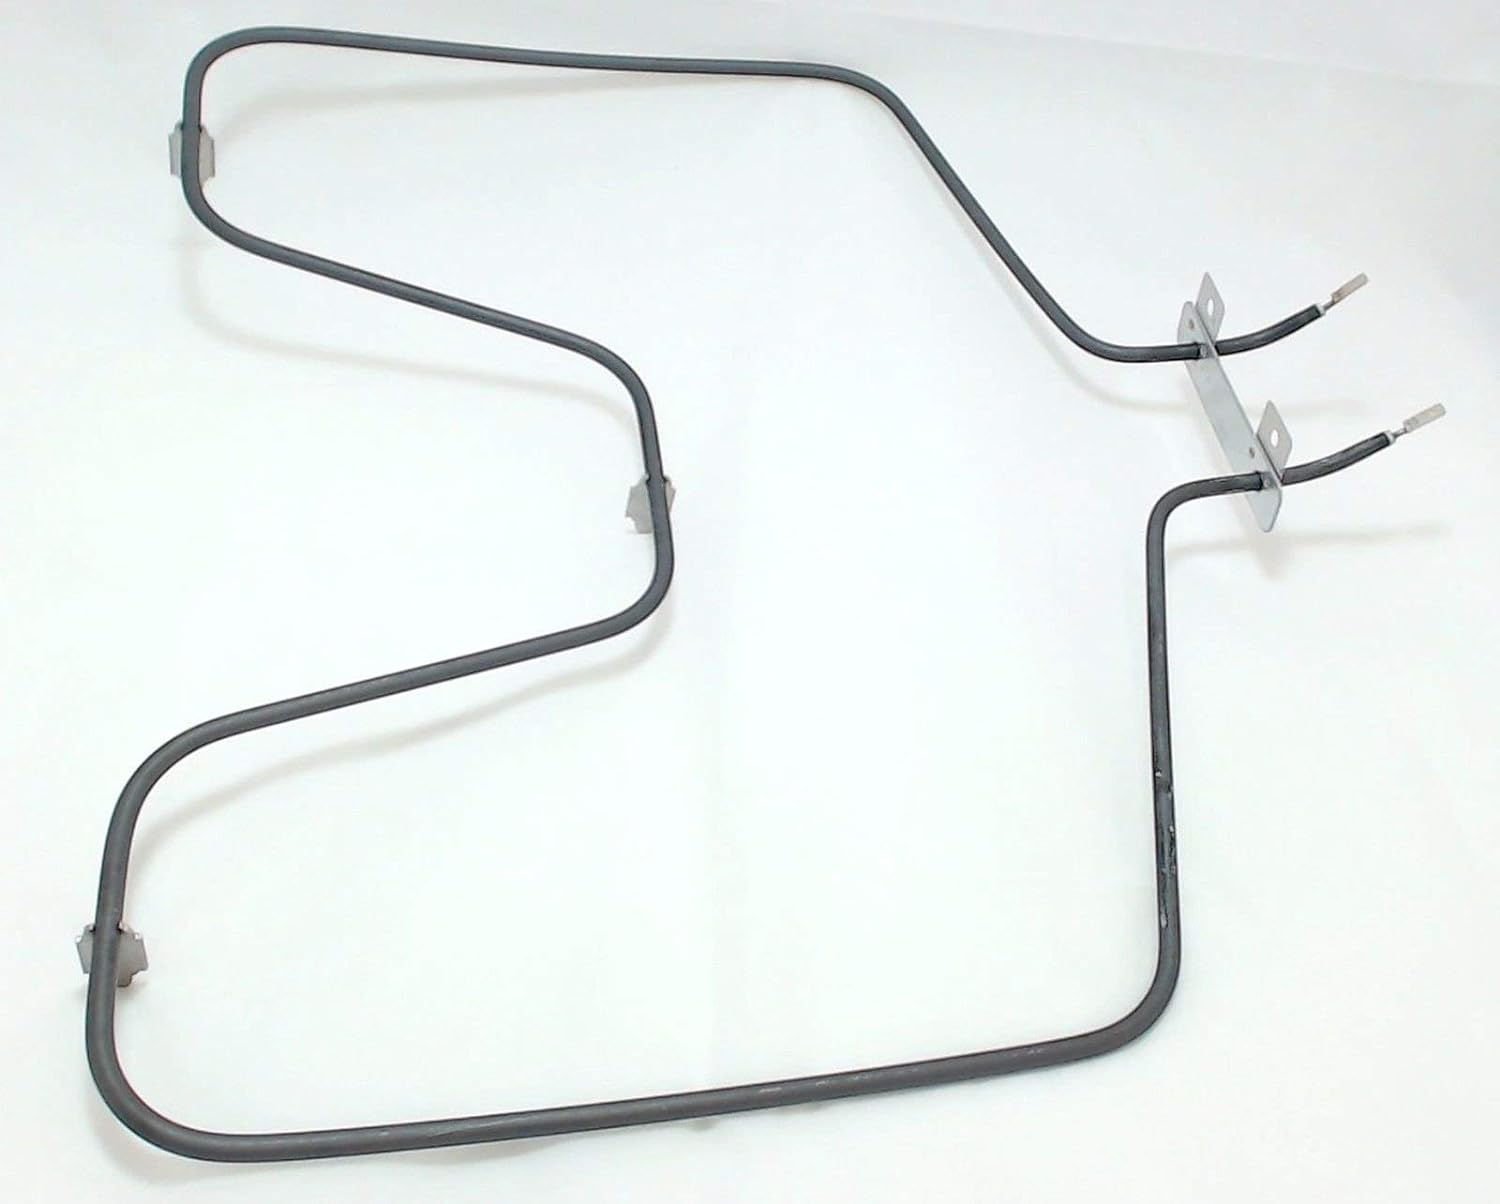 General Electric GE WB44K10005 Oven Bake Heating Element